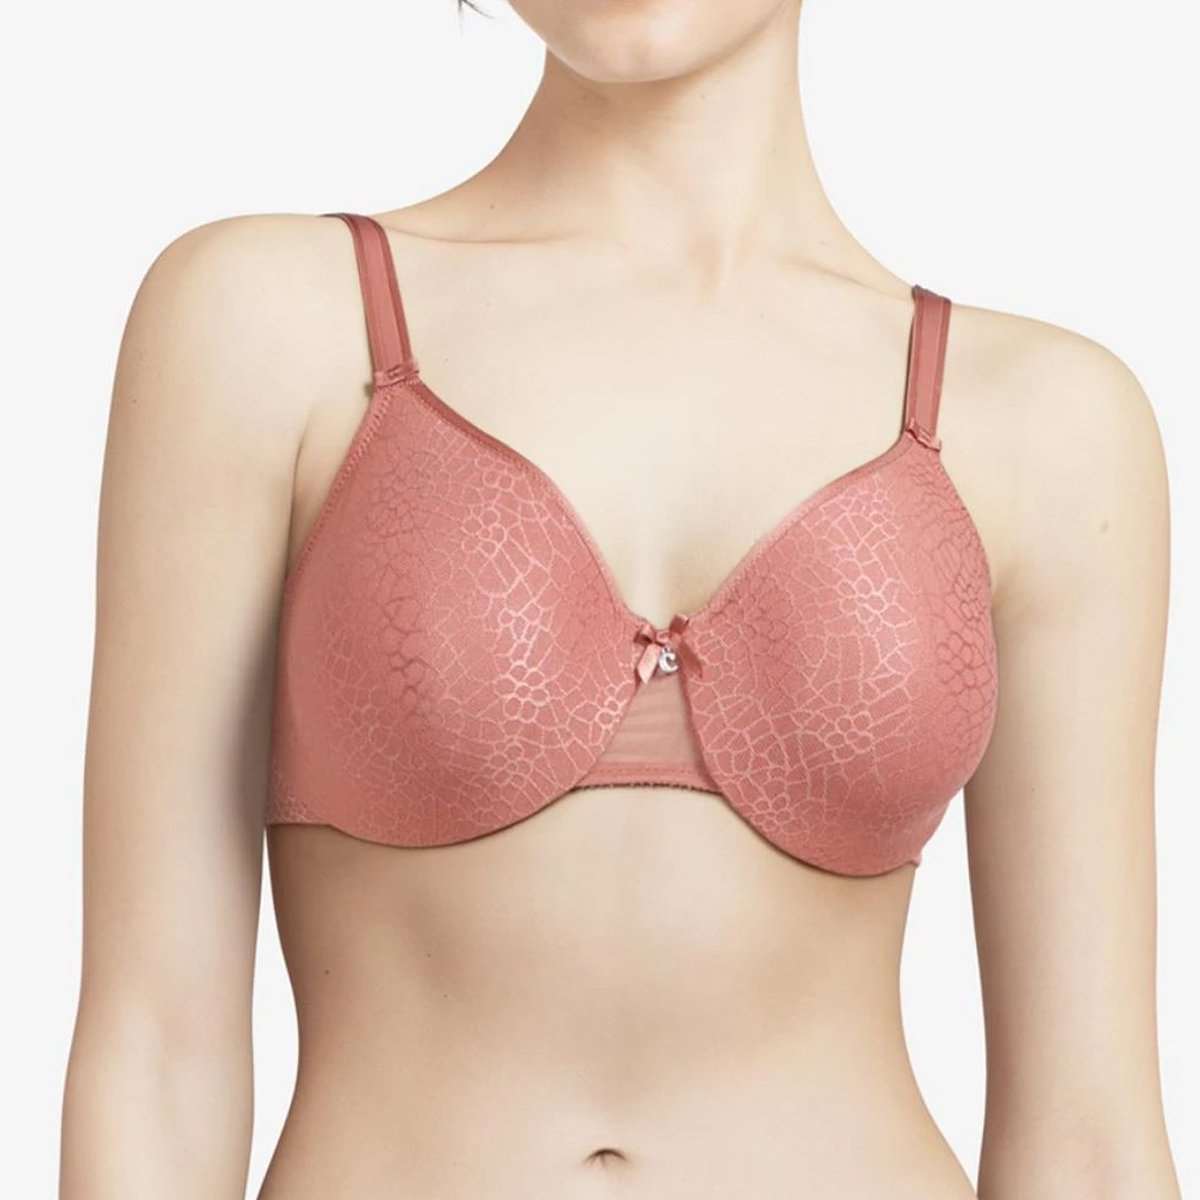 Chantelle C Magnifique Full Cup Bra in Rose Canyon 1891